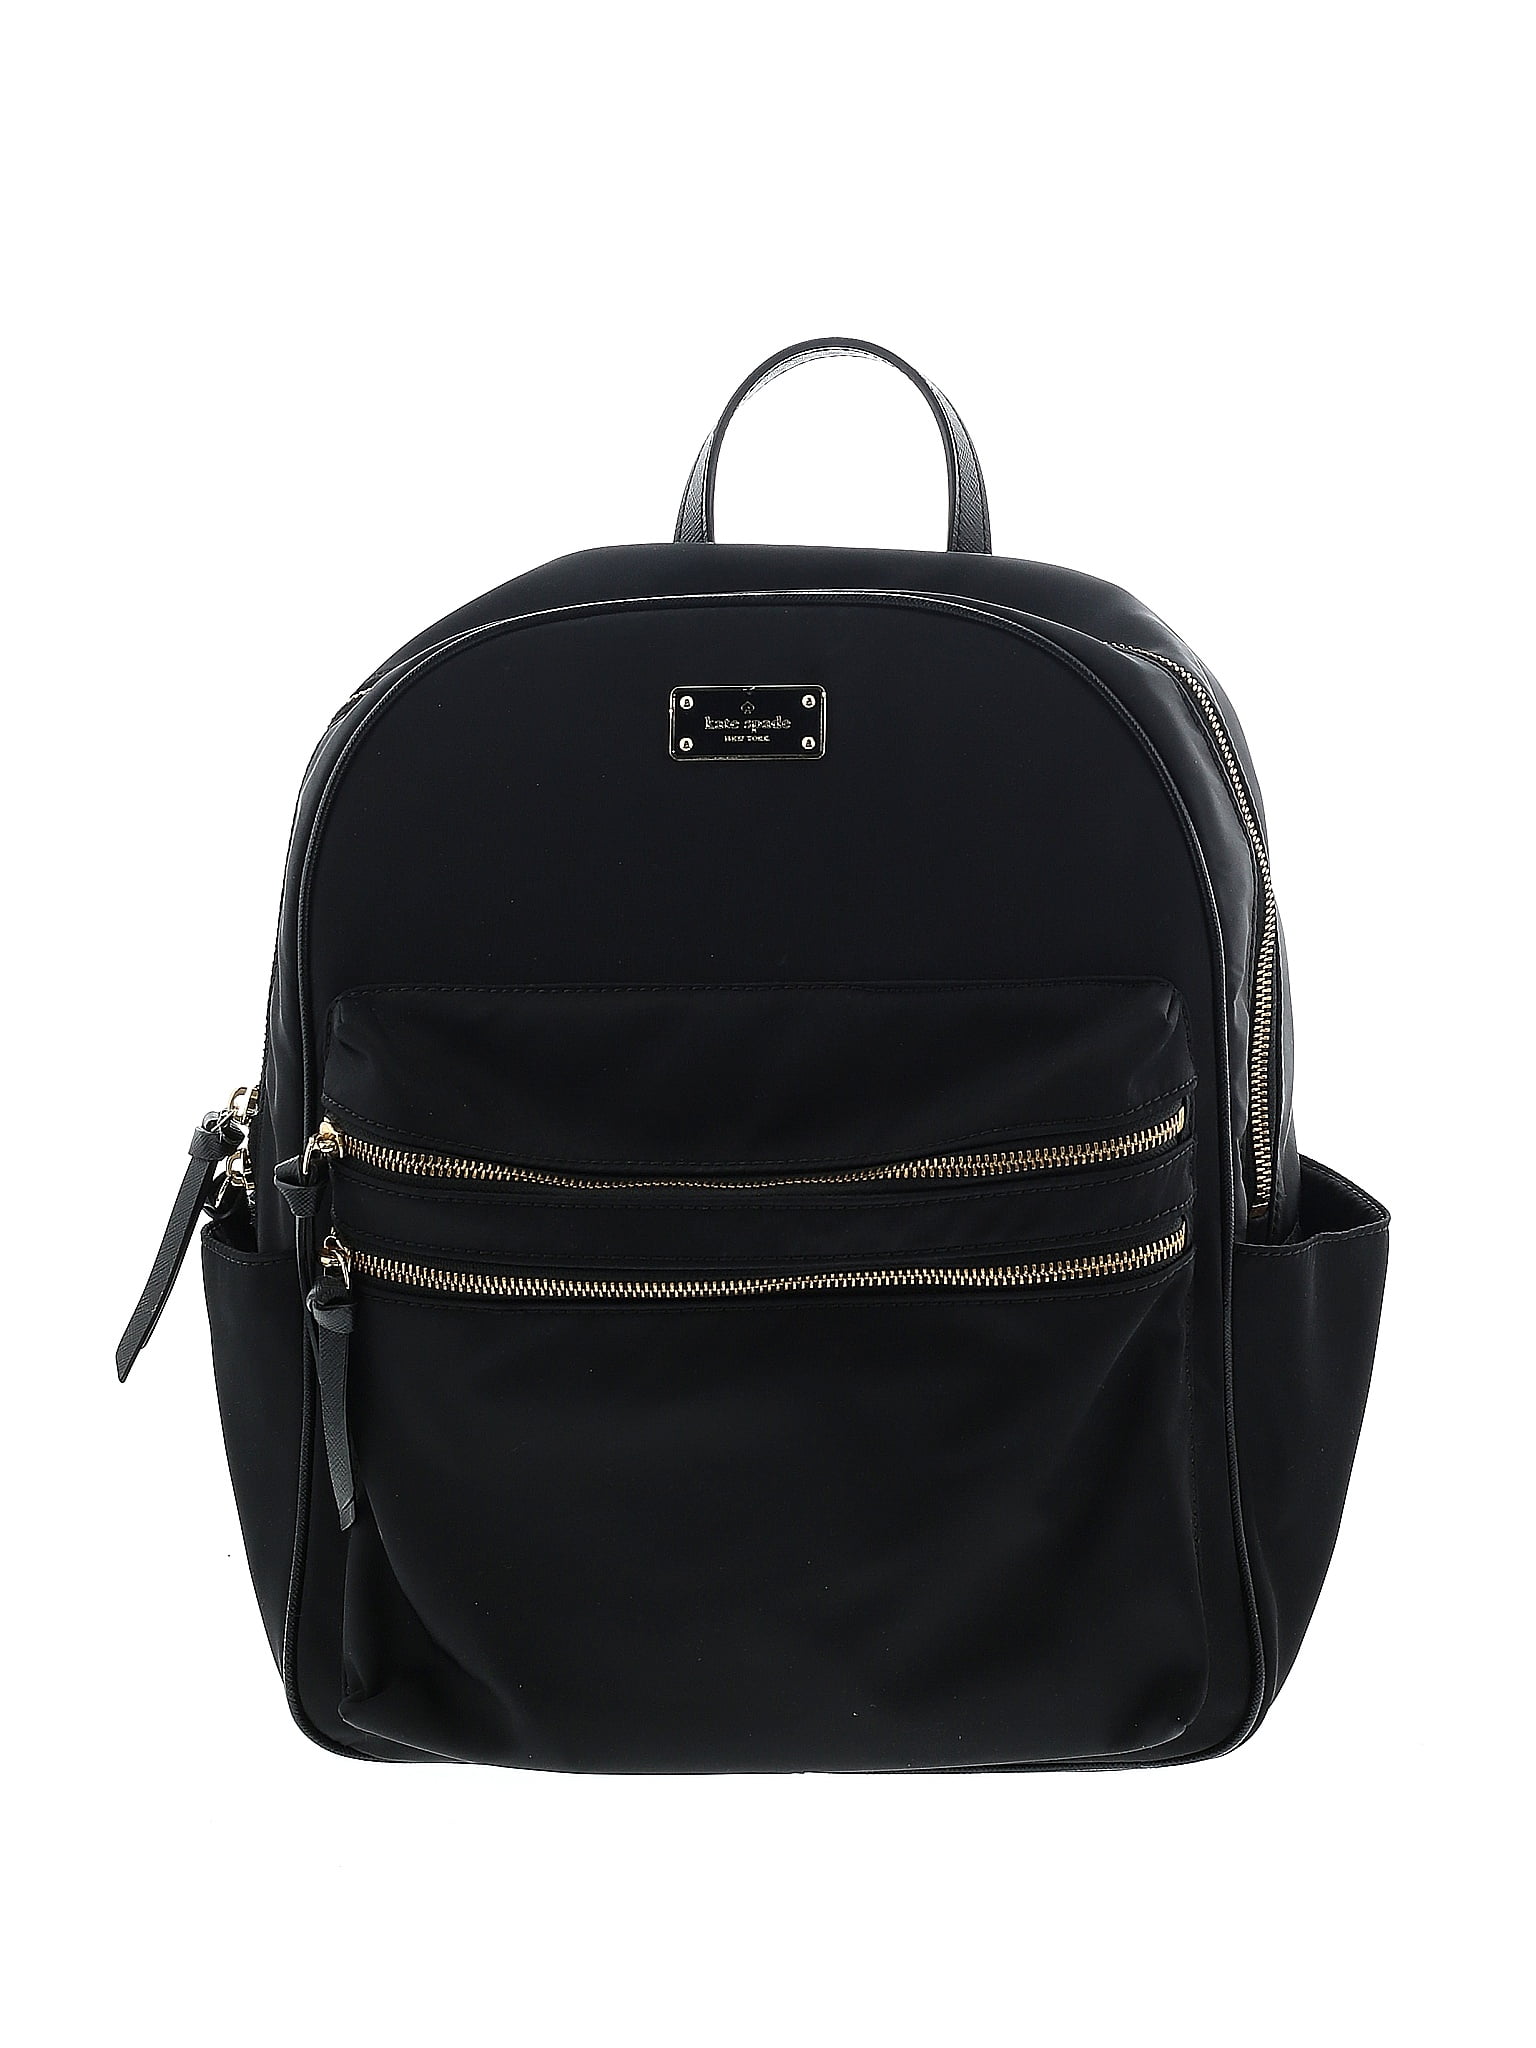 Kate Spade New York Backpacks On Sale Up To 90% Off Retail